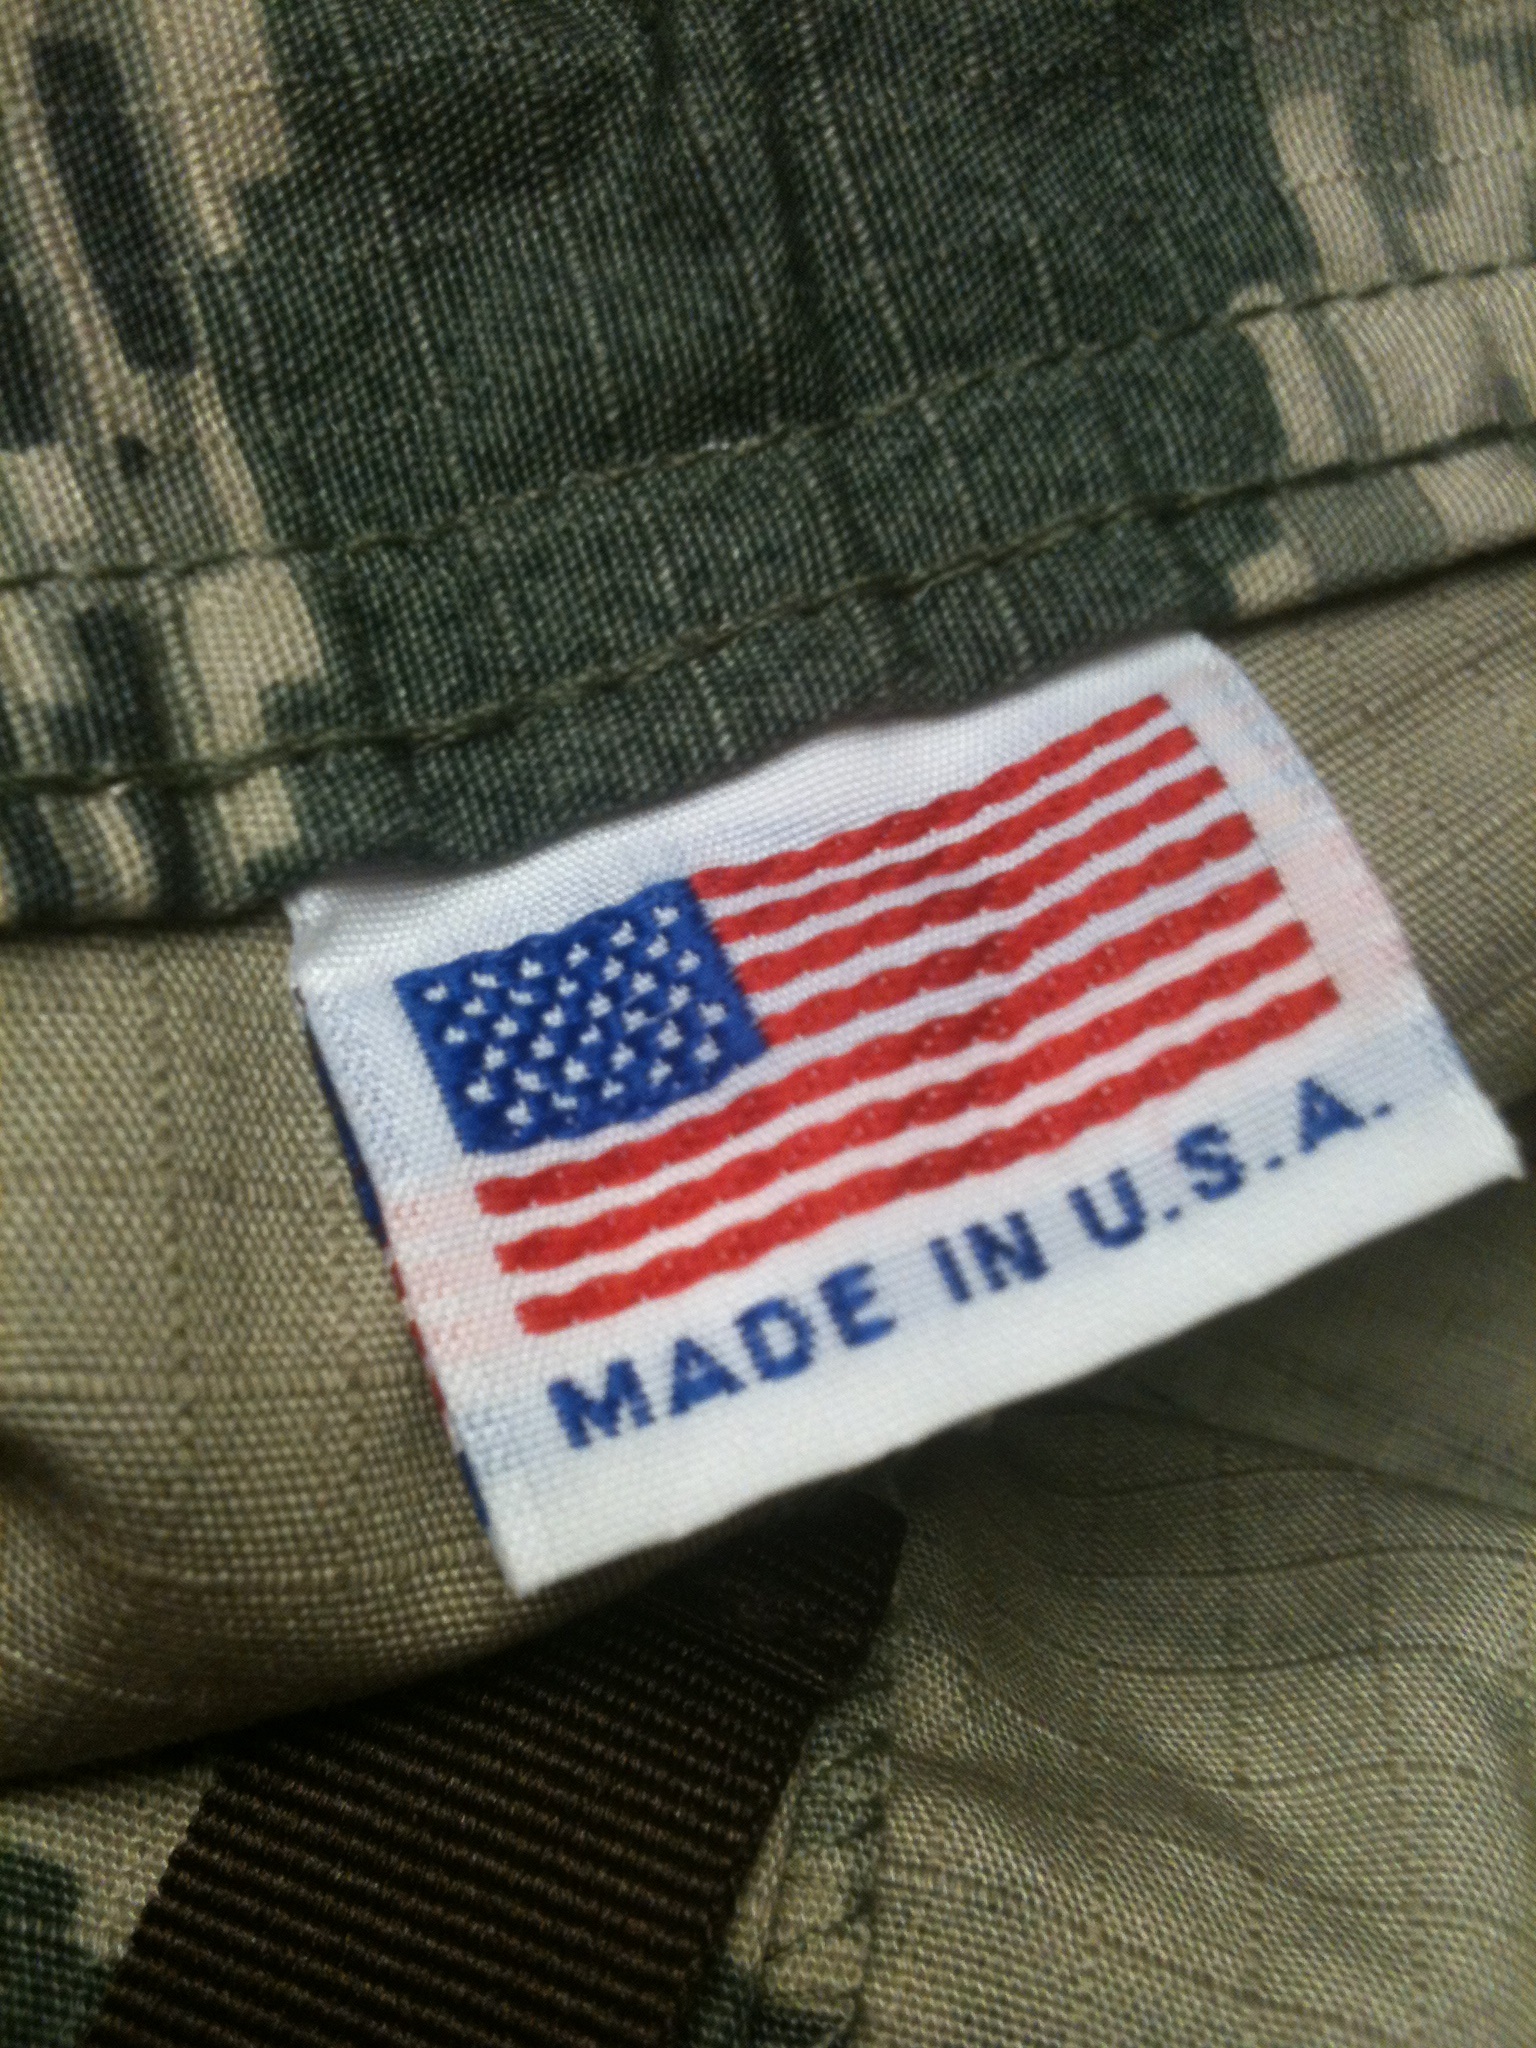 The new camo shirts are proudly made in America.